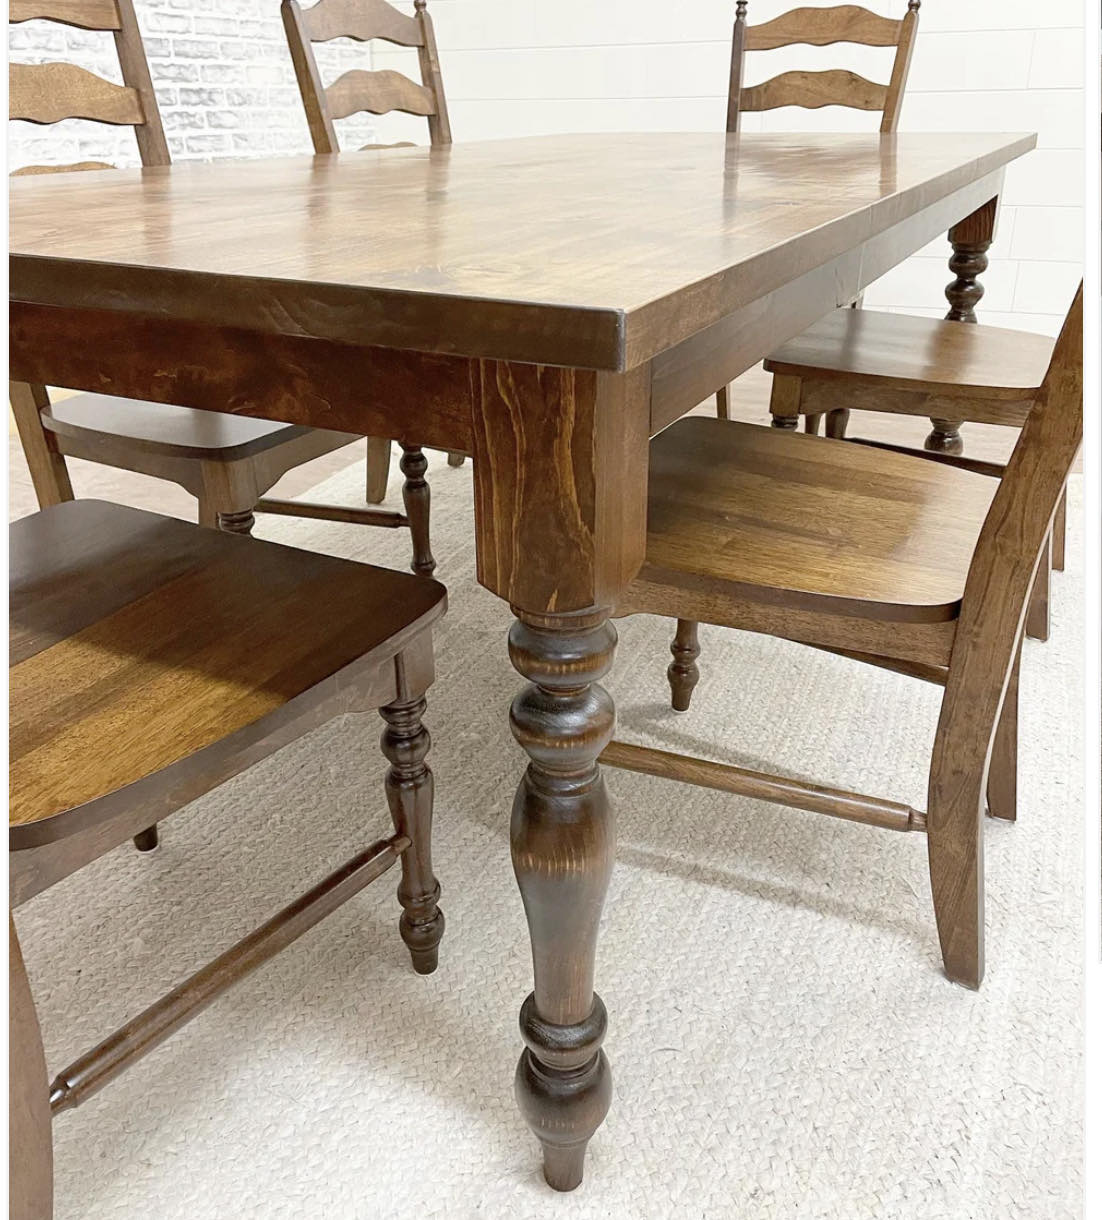 6' L x 42" W Rustic Alder Dining Table with 6 Maine Ladder Chairs